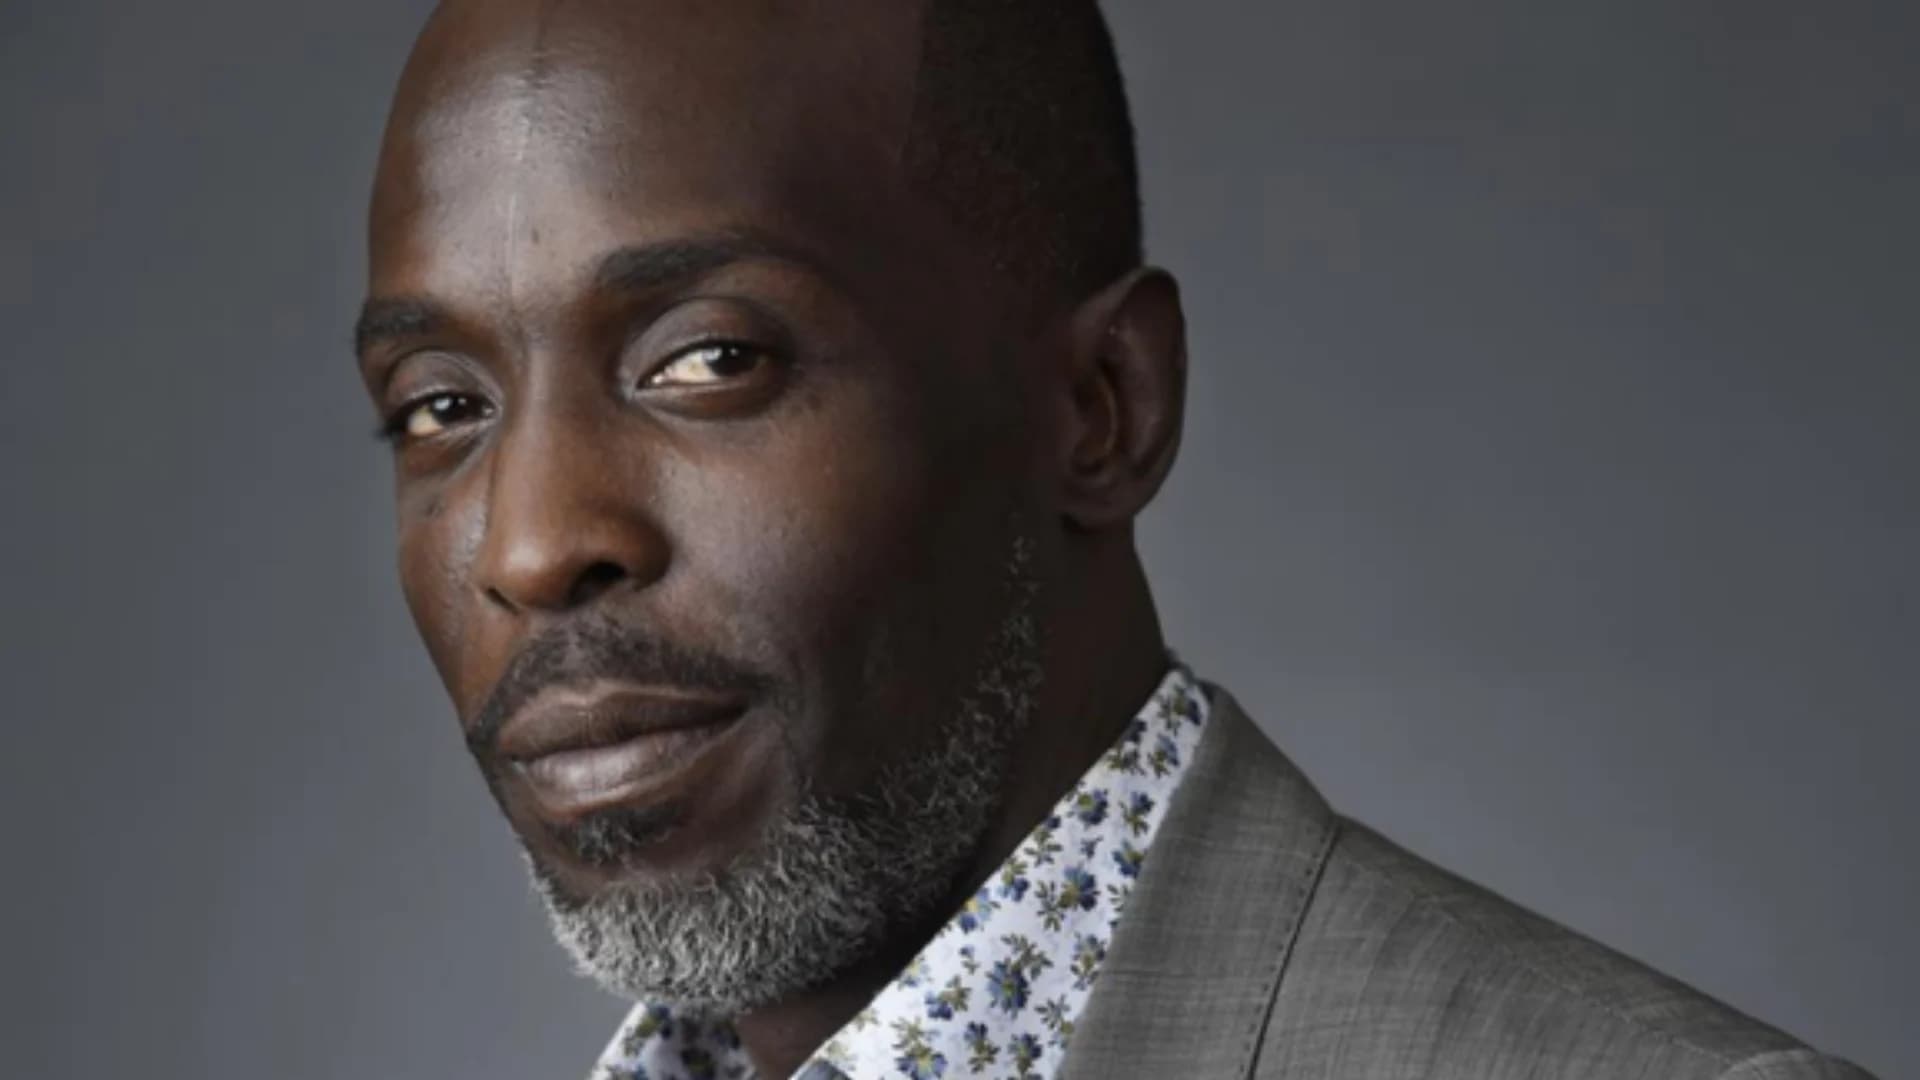 Autopsy: Actor Michael K. Williams died of drug intoxication